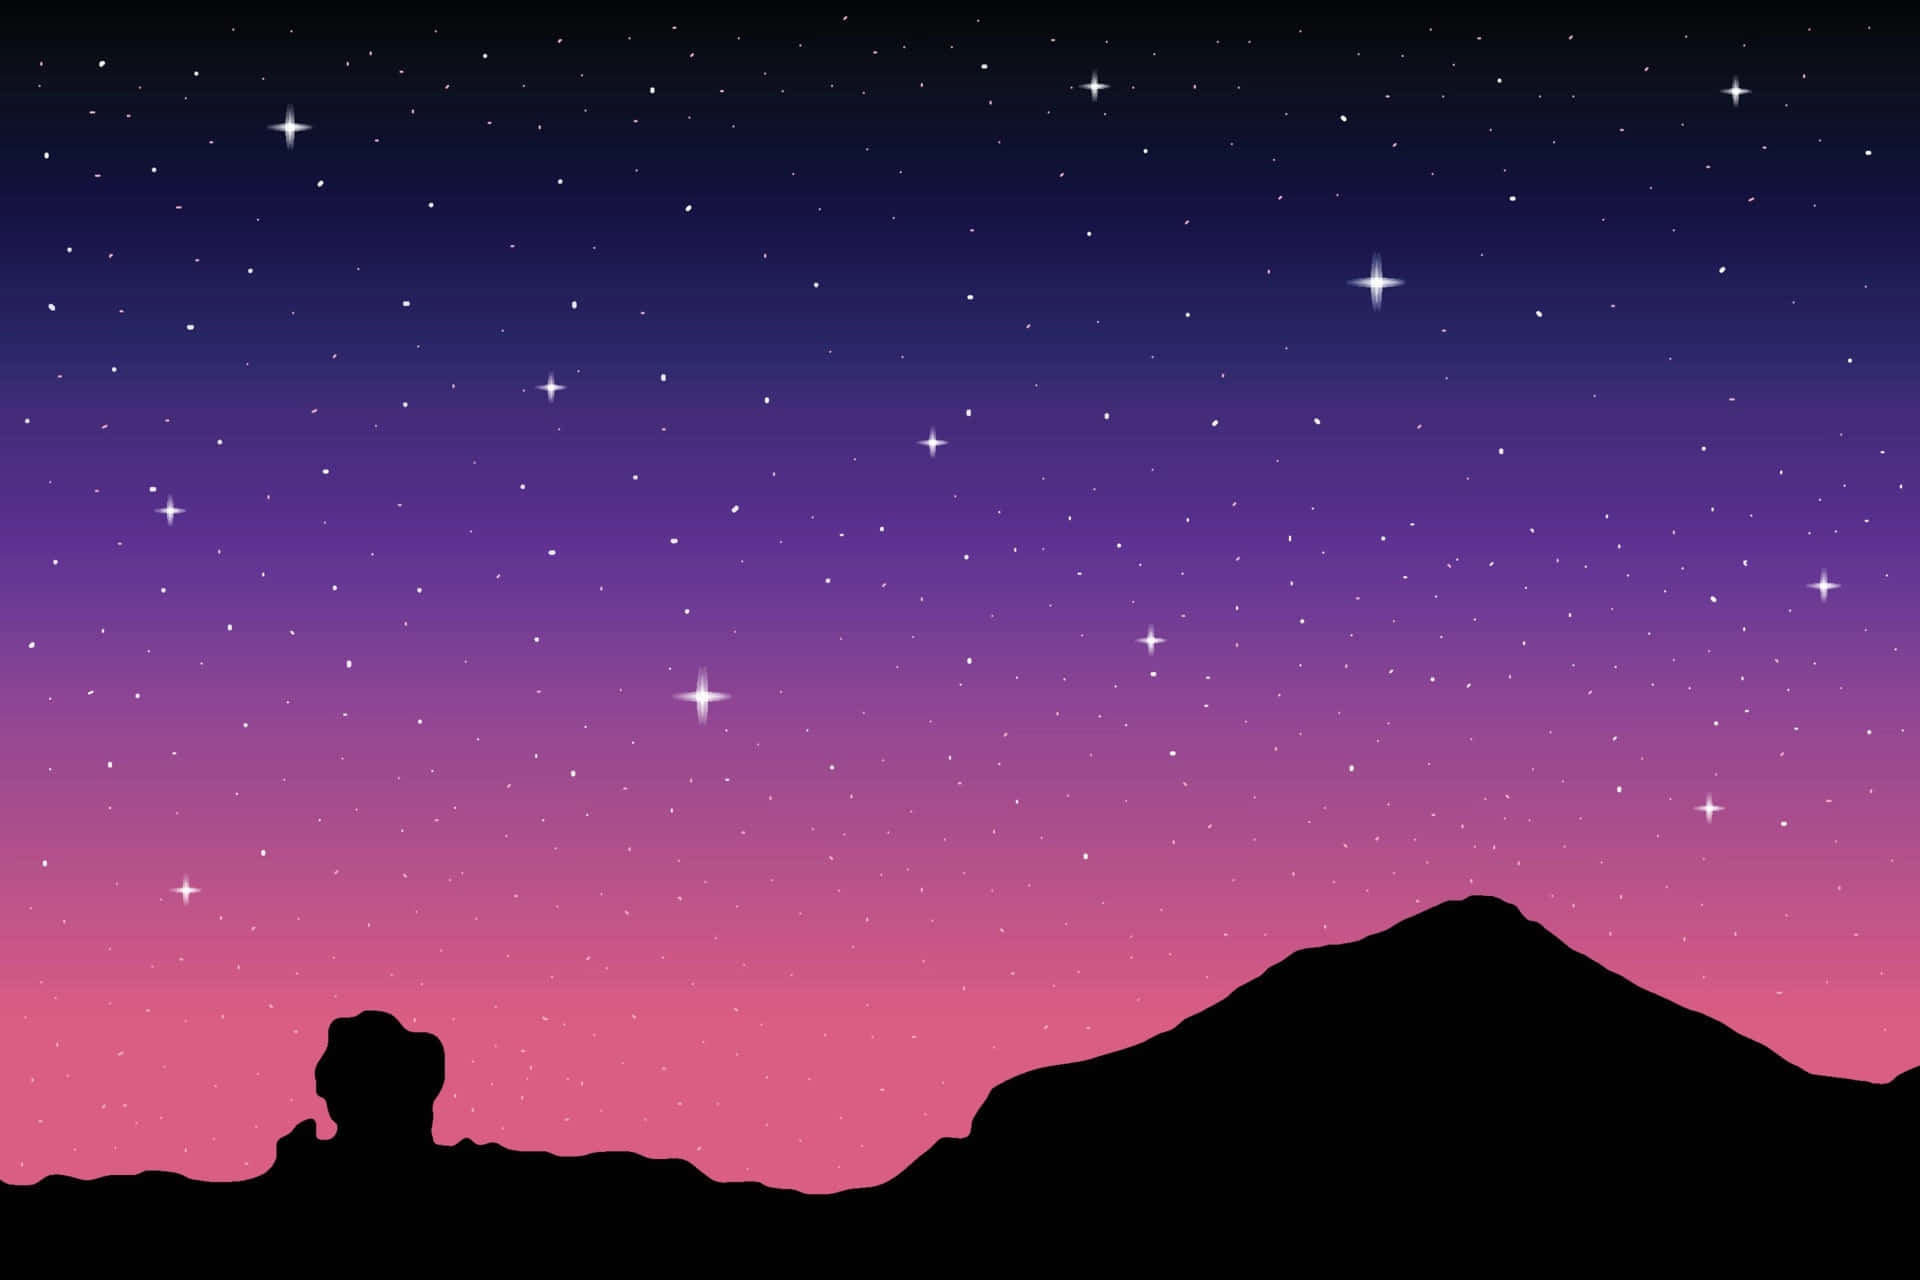 Silhouette Of A Man And Woman In The Night Sky